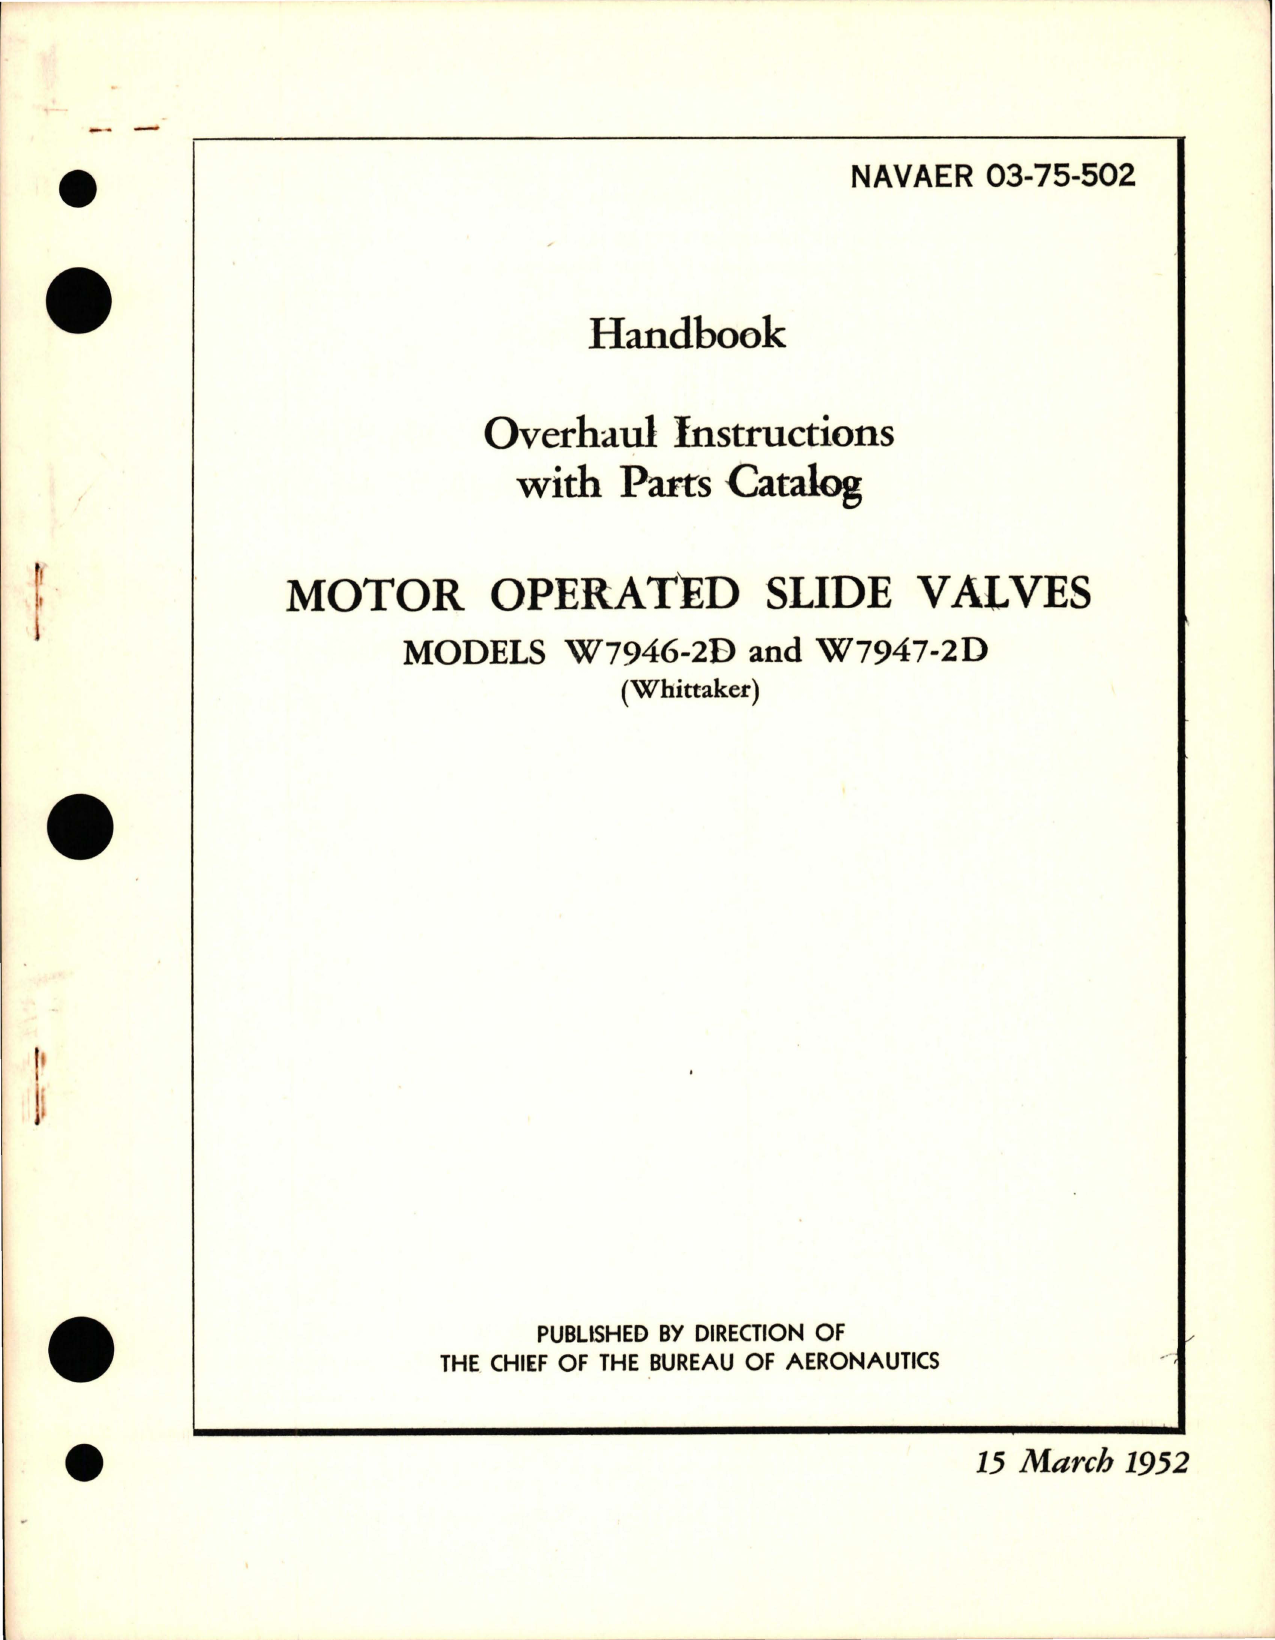 Sample page 1 from AirCorps Library document: Overhaul Instructions with Parts Catalog for Motor Operated Slide Valves - Models W7946-2D and W7947-2D 